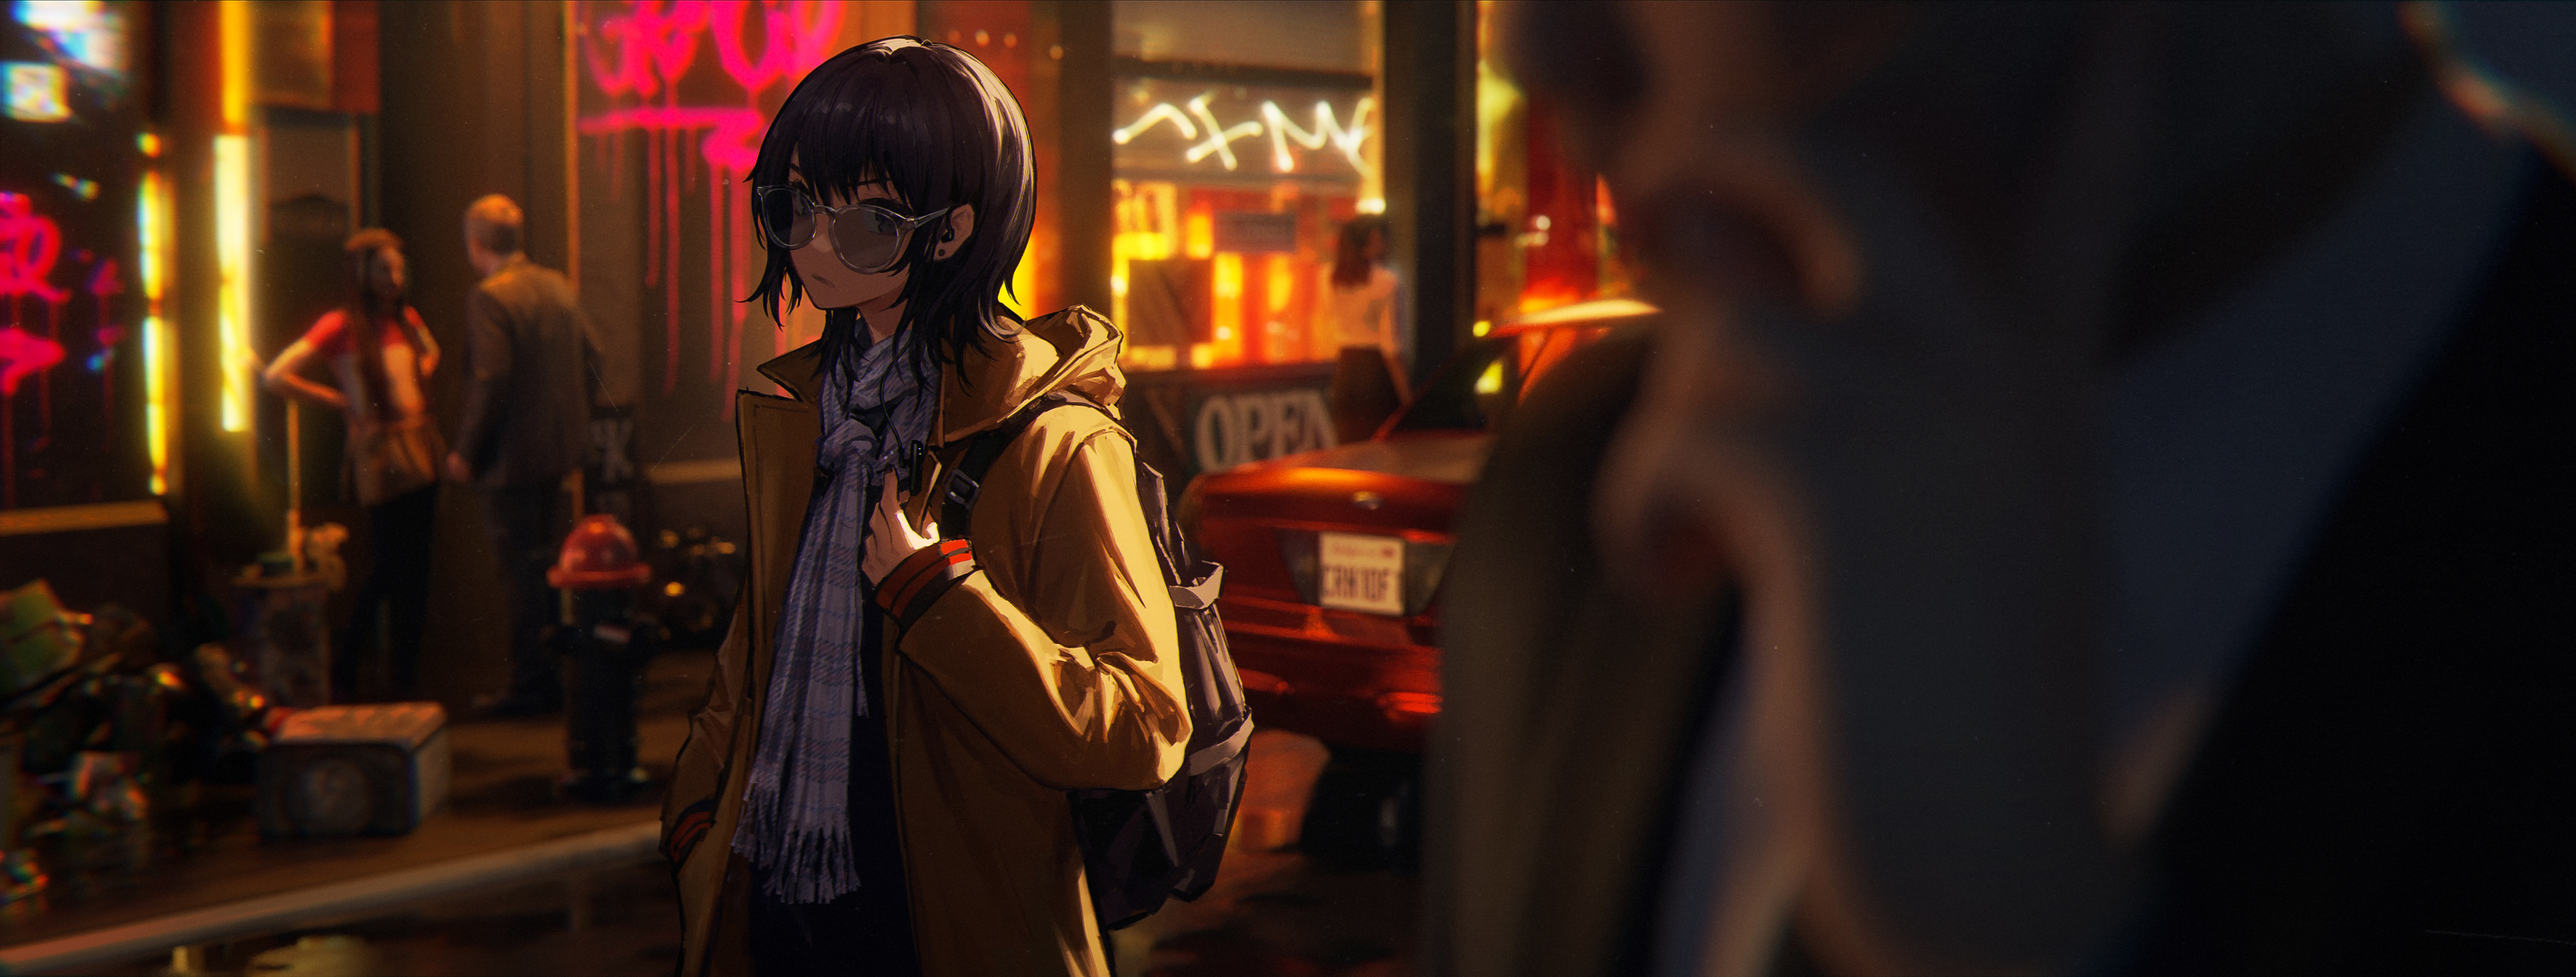 Anime 4396x1667 Wang Xi anime girls anime looking at viewer standing backpacks glasses women with glasses short hair black hair depth of field licence plates long sleeves vehicle blurred blurry background brown coat coats outdoors women outdoors scarf white scarf building neon city